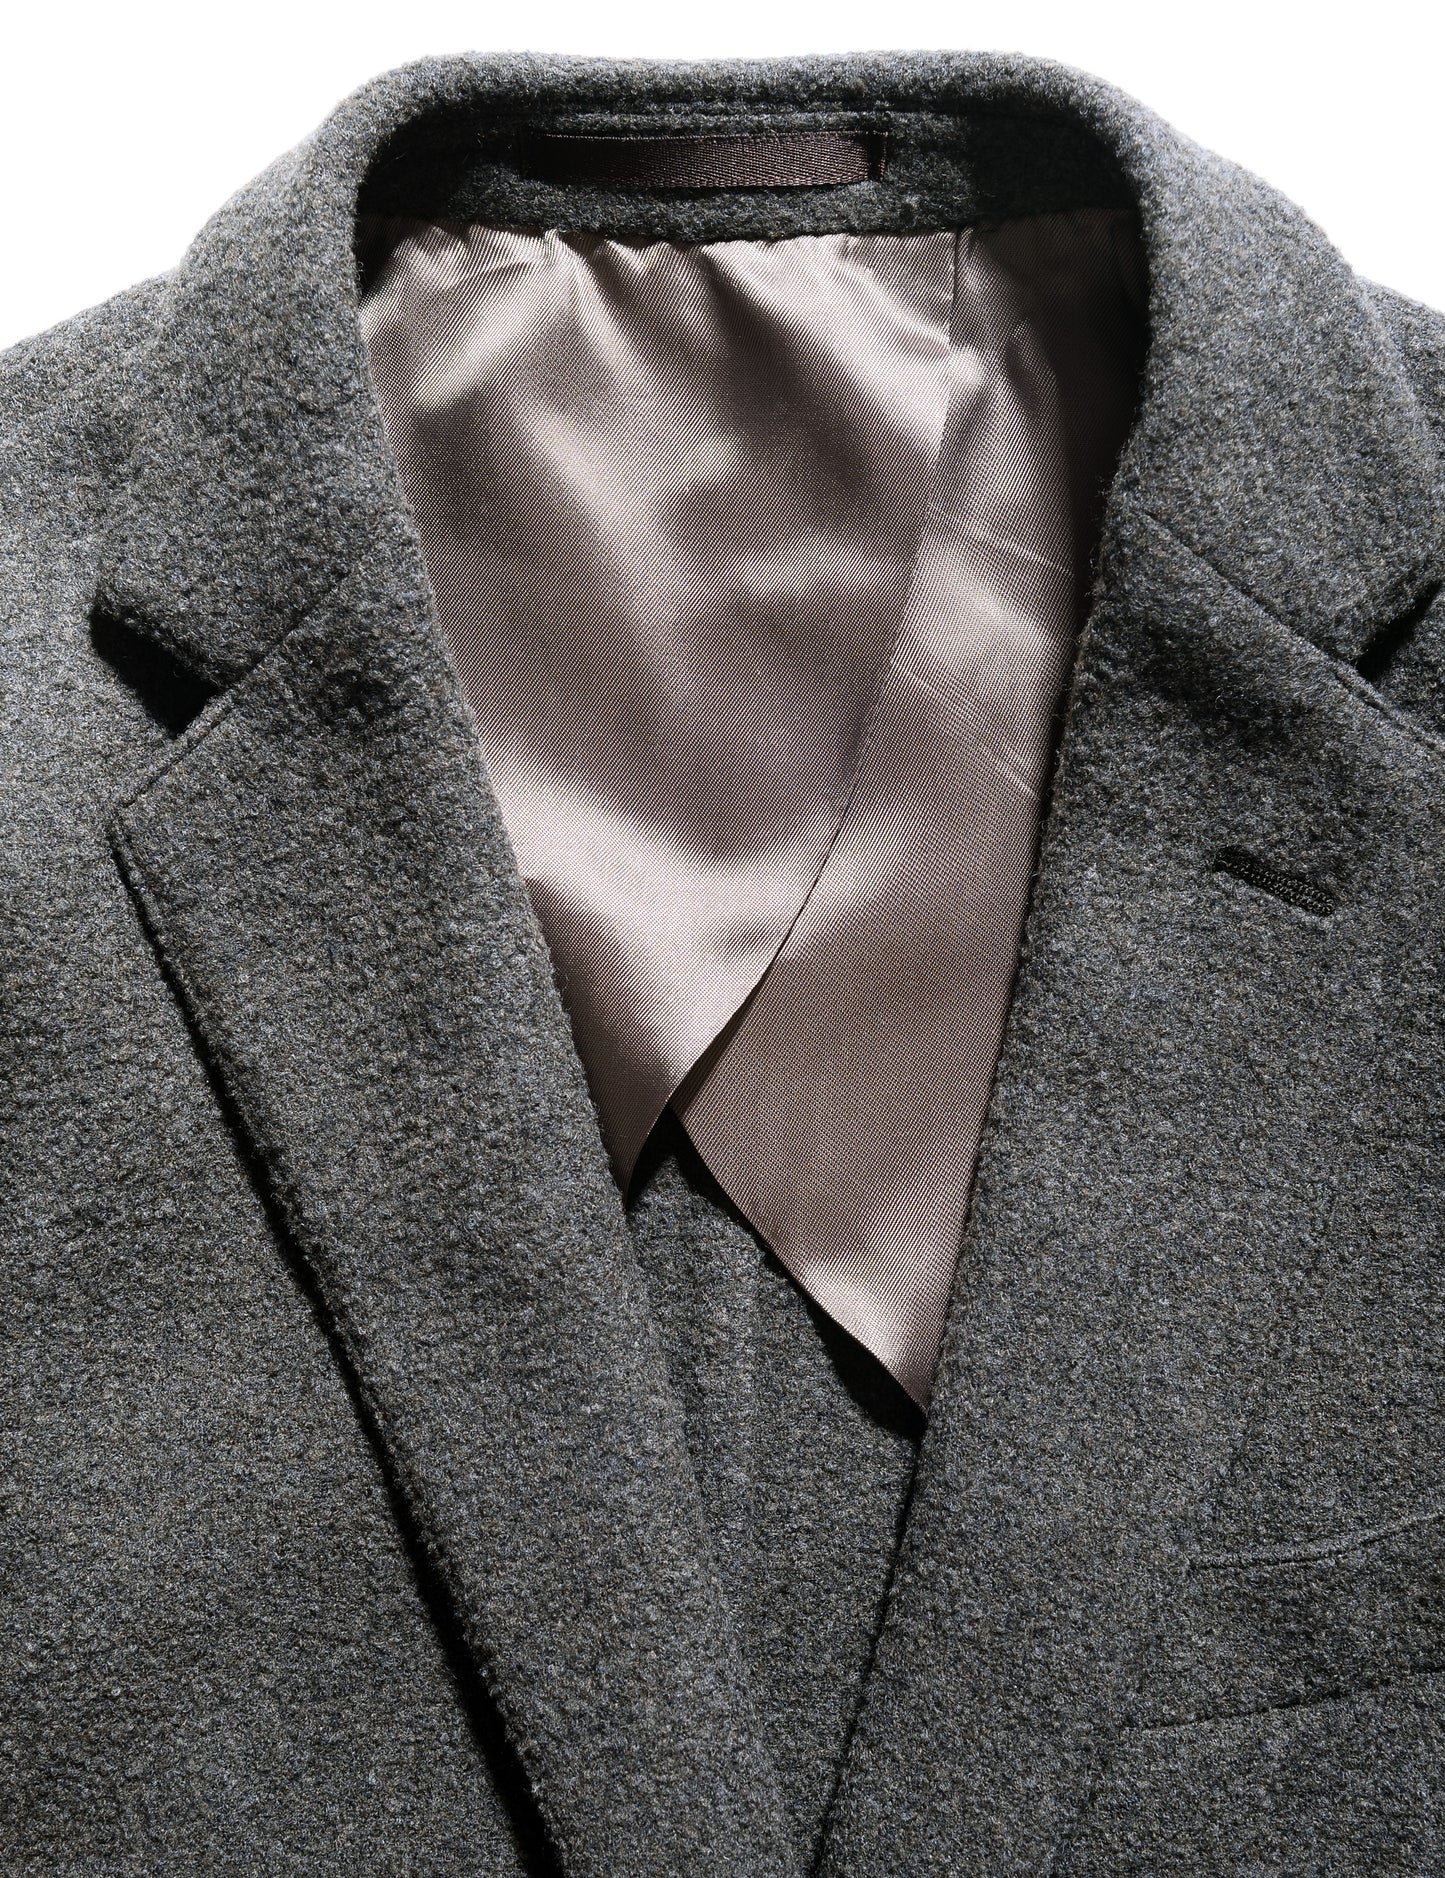 Detail shot of lapel, half-lining, and fabric texture on Brooklyn Tailors BKT35 Unstructured Jacket in 14.5 Micron Lofted Wool & Silk - London Gray